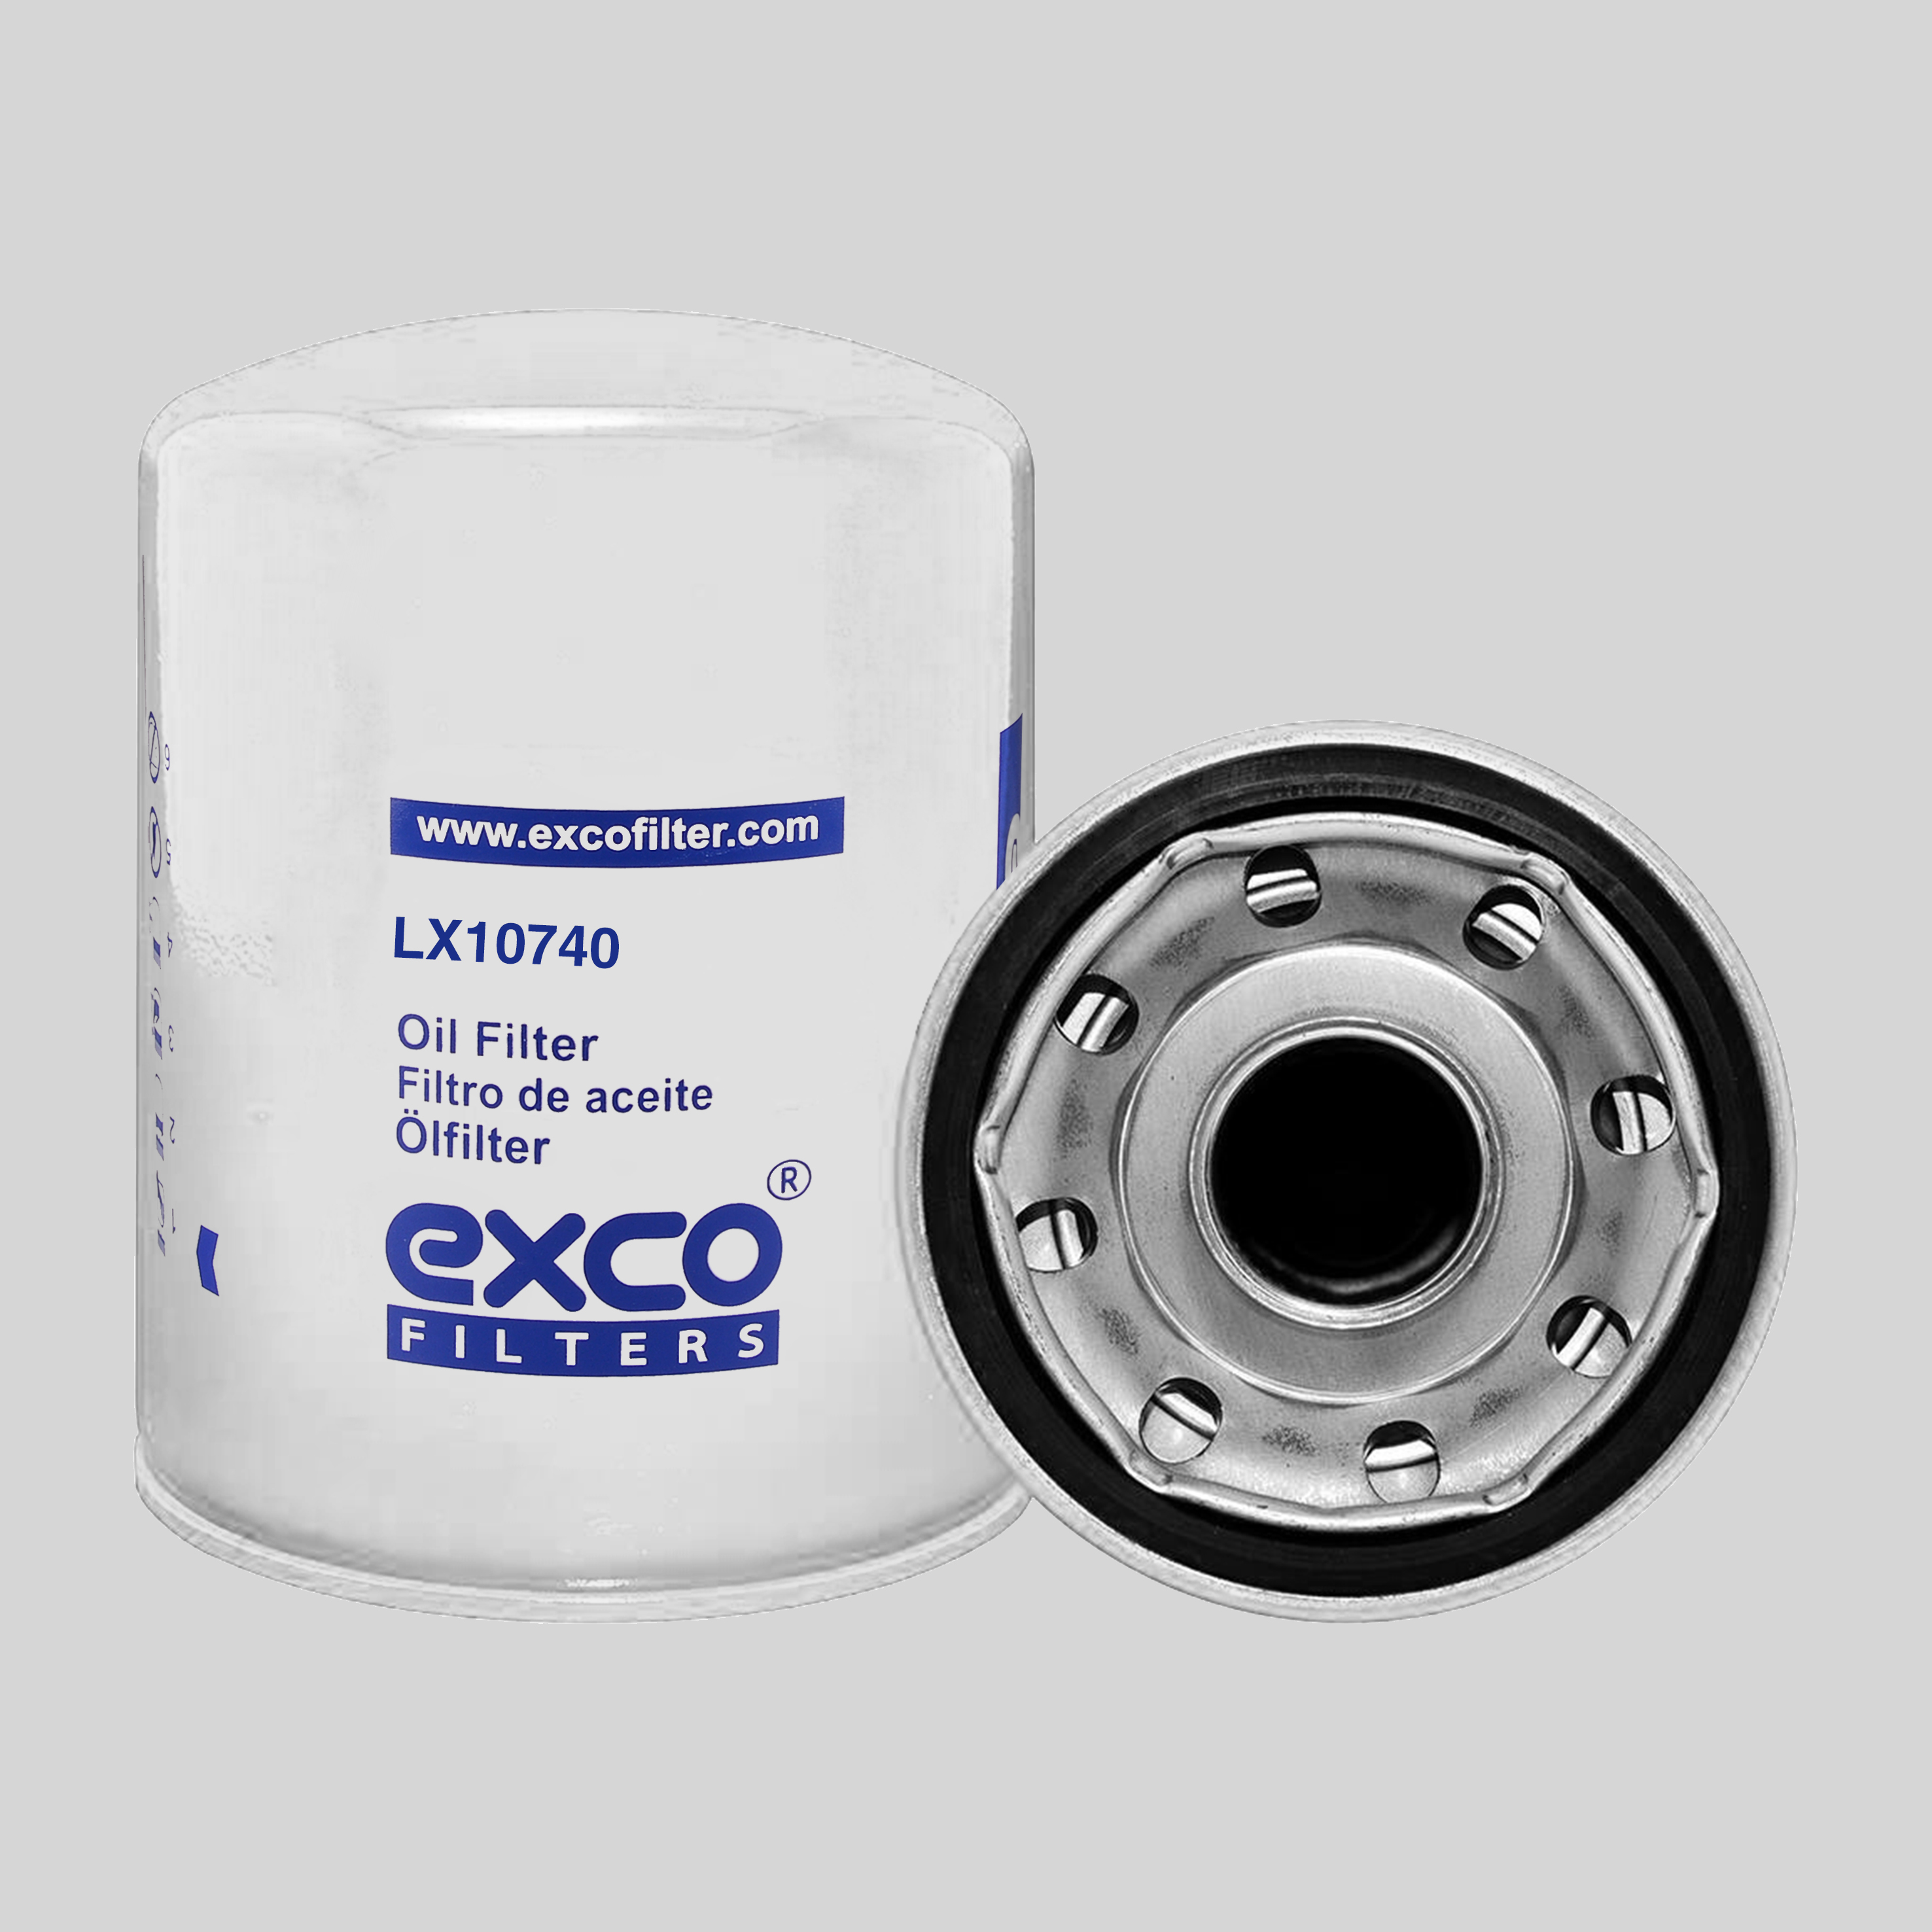 
                        
                                                                                                                LUBER FINER LFP947 - oil filter cross reference - excofilter
                                                                                    
                            